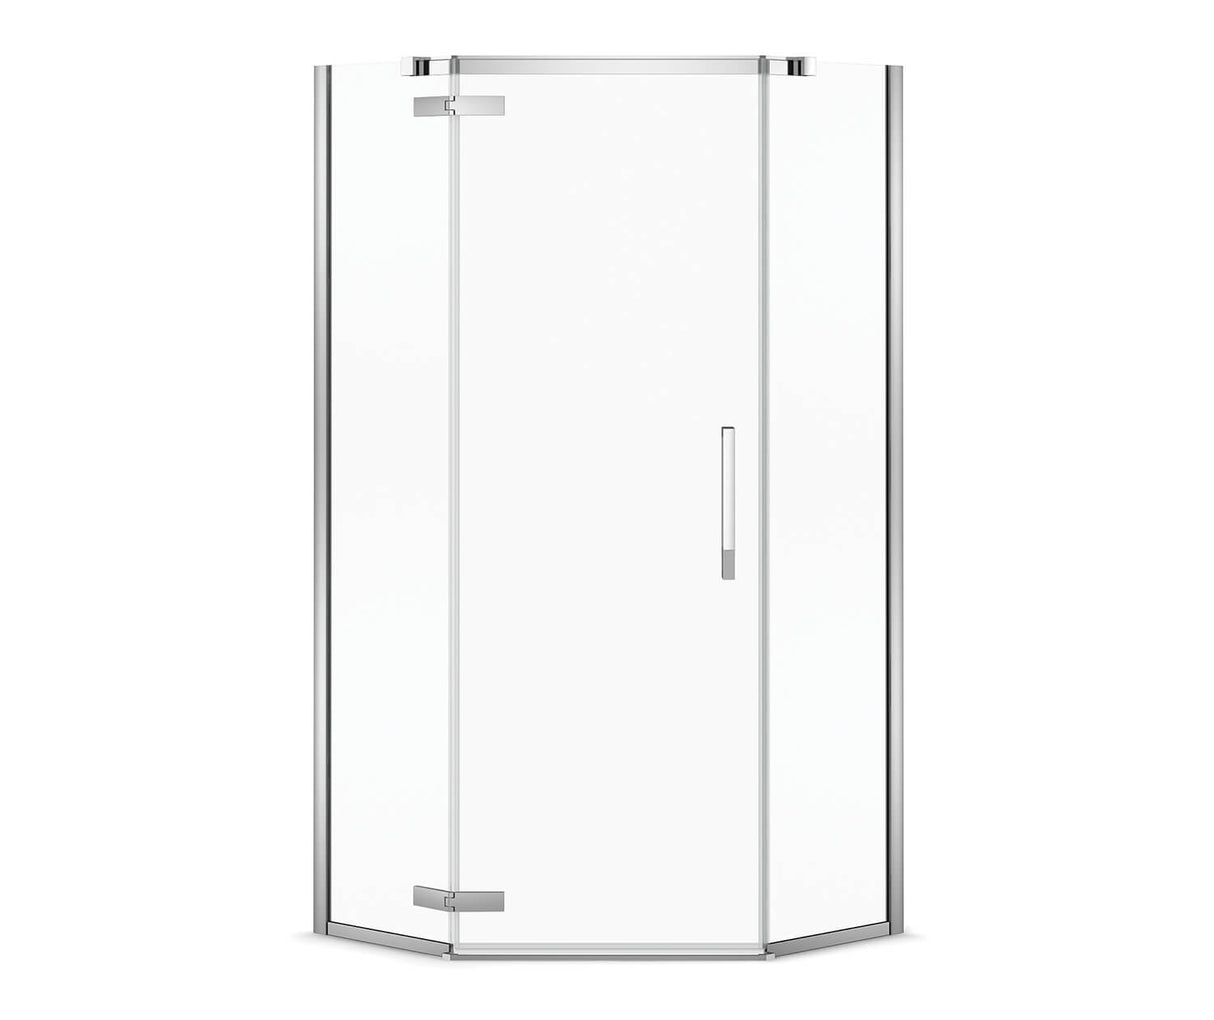 MAAX 139315-900-084-000 Davana Neo-angle 38 x 38 x 75 in. 8mm Pivot Shower Door for Corner Installation with Clear glass in Chrome